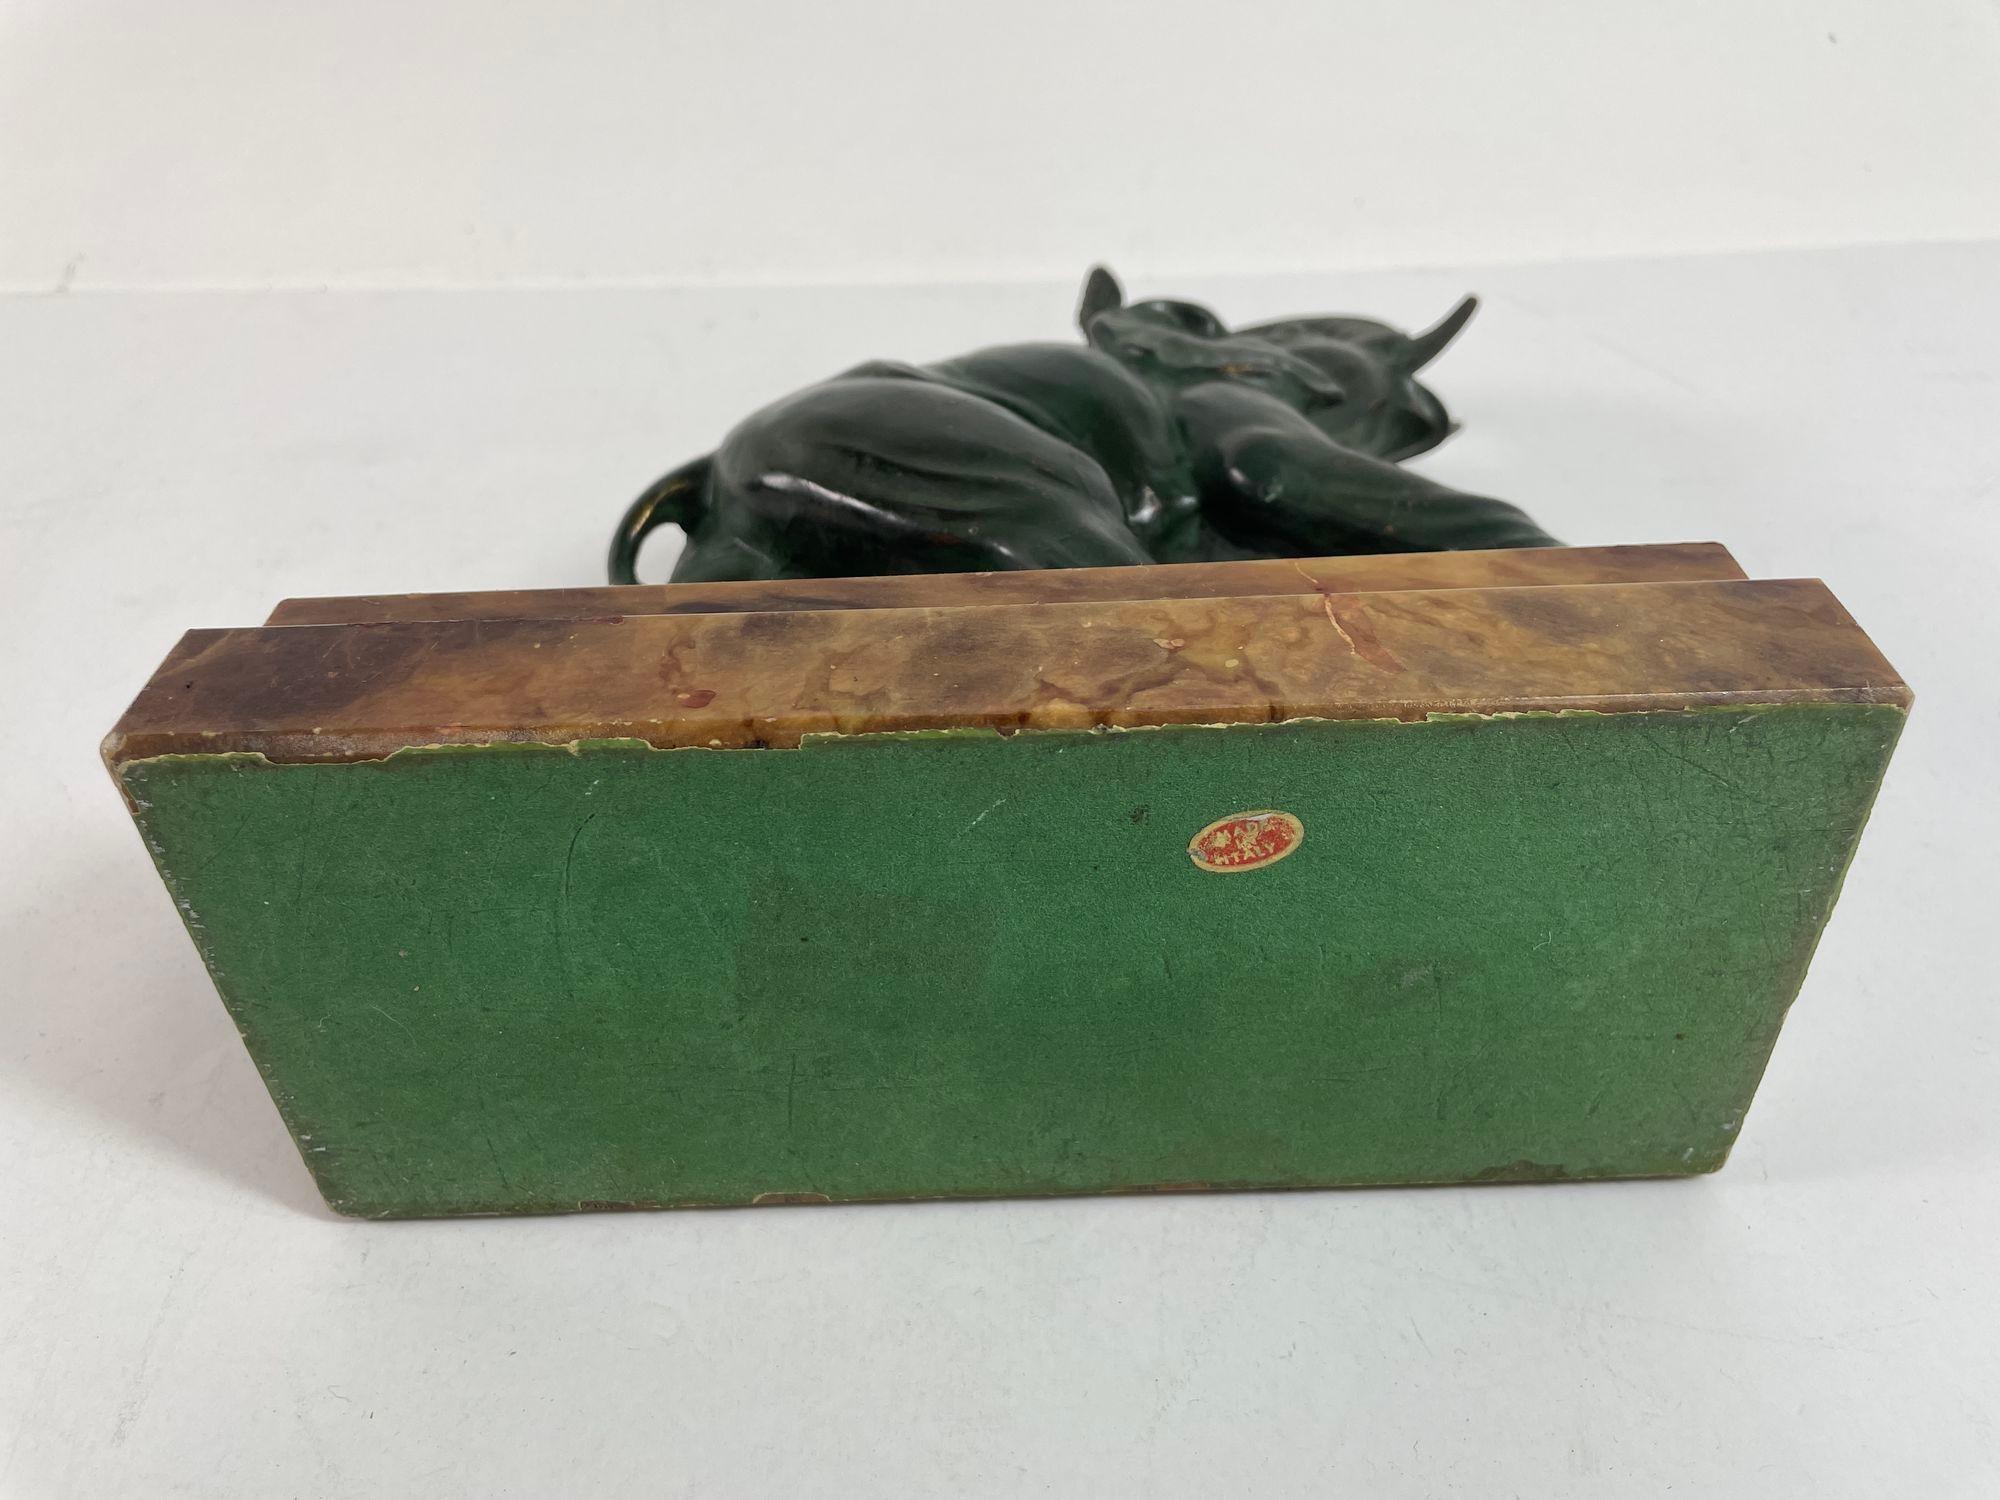 Art Deco Bronze Elephant Sculpture with Raised Trunk Made in Italy For Sale 2